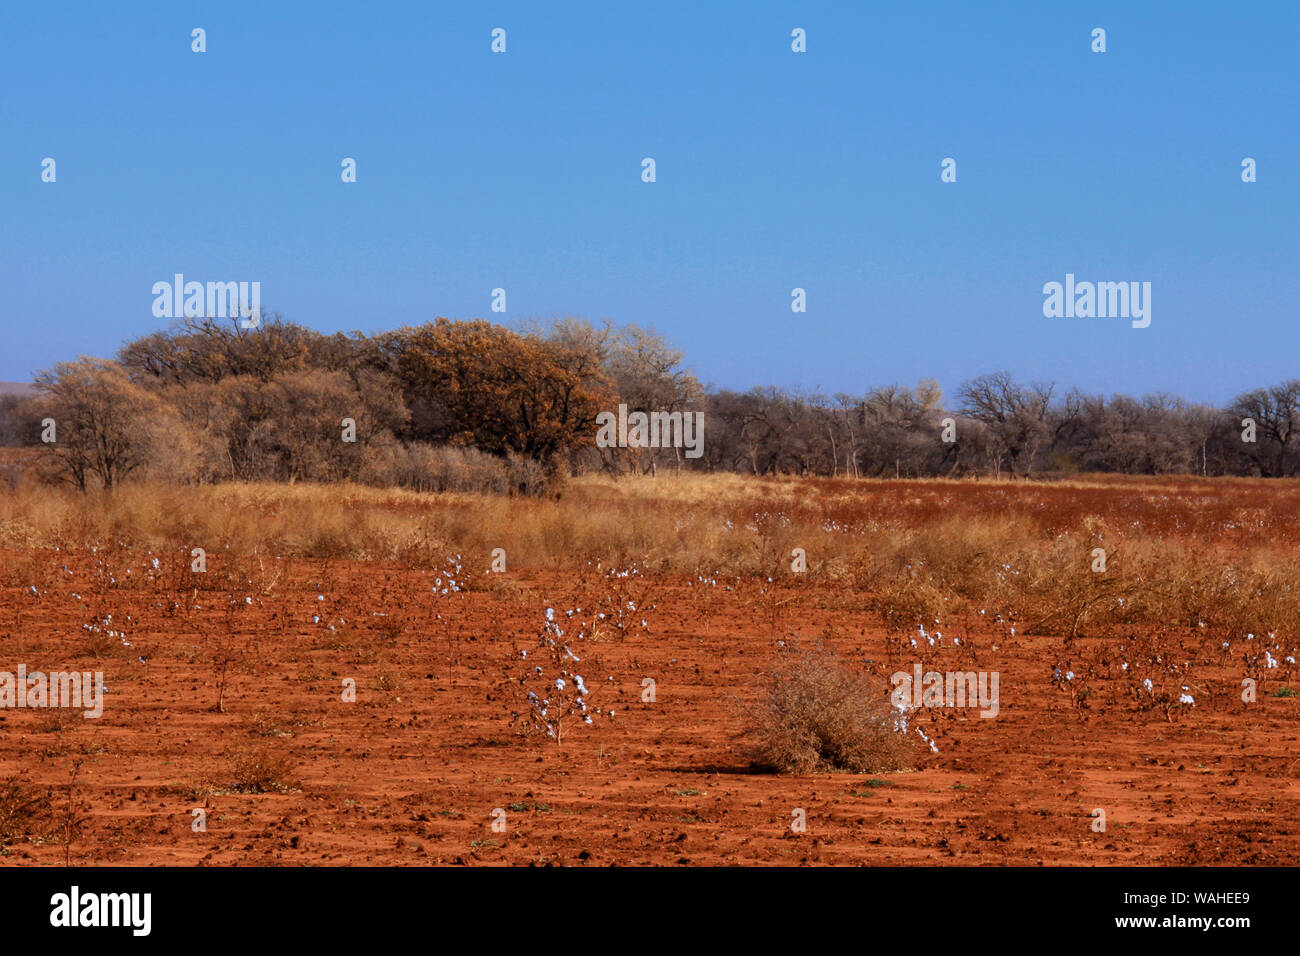 A sparse late autumn harvested cotton field has a few cotton plants ready for gleaning in western Oklahoma. Stock Photo